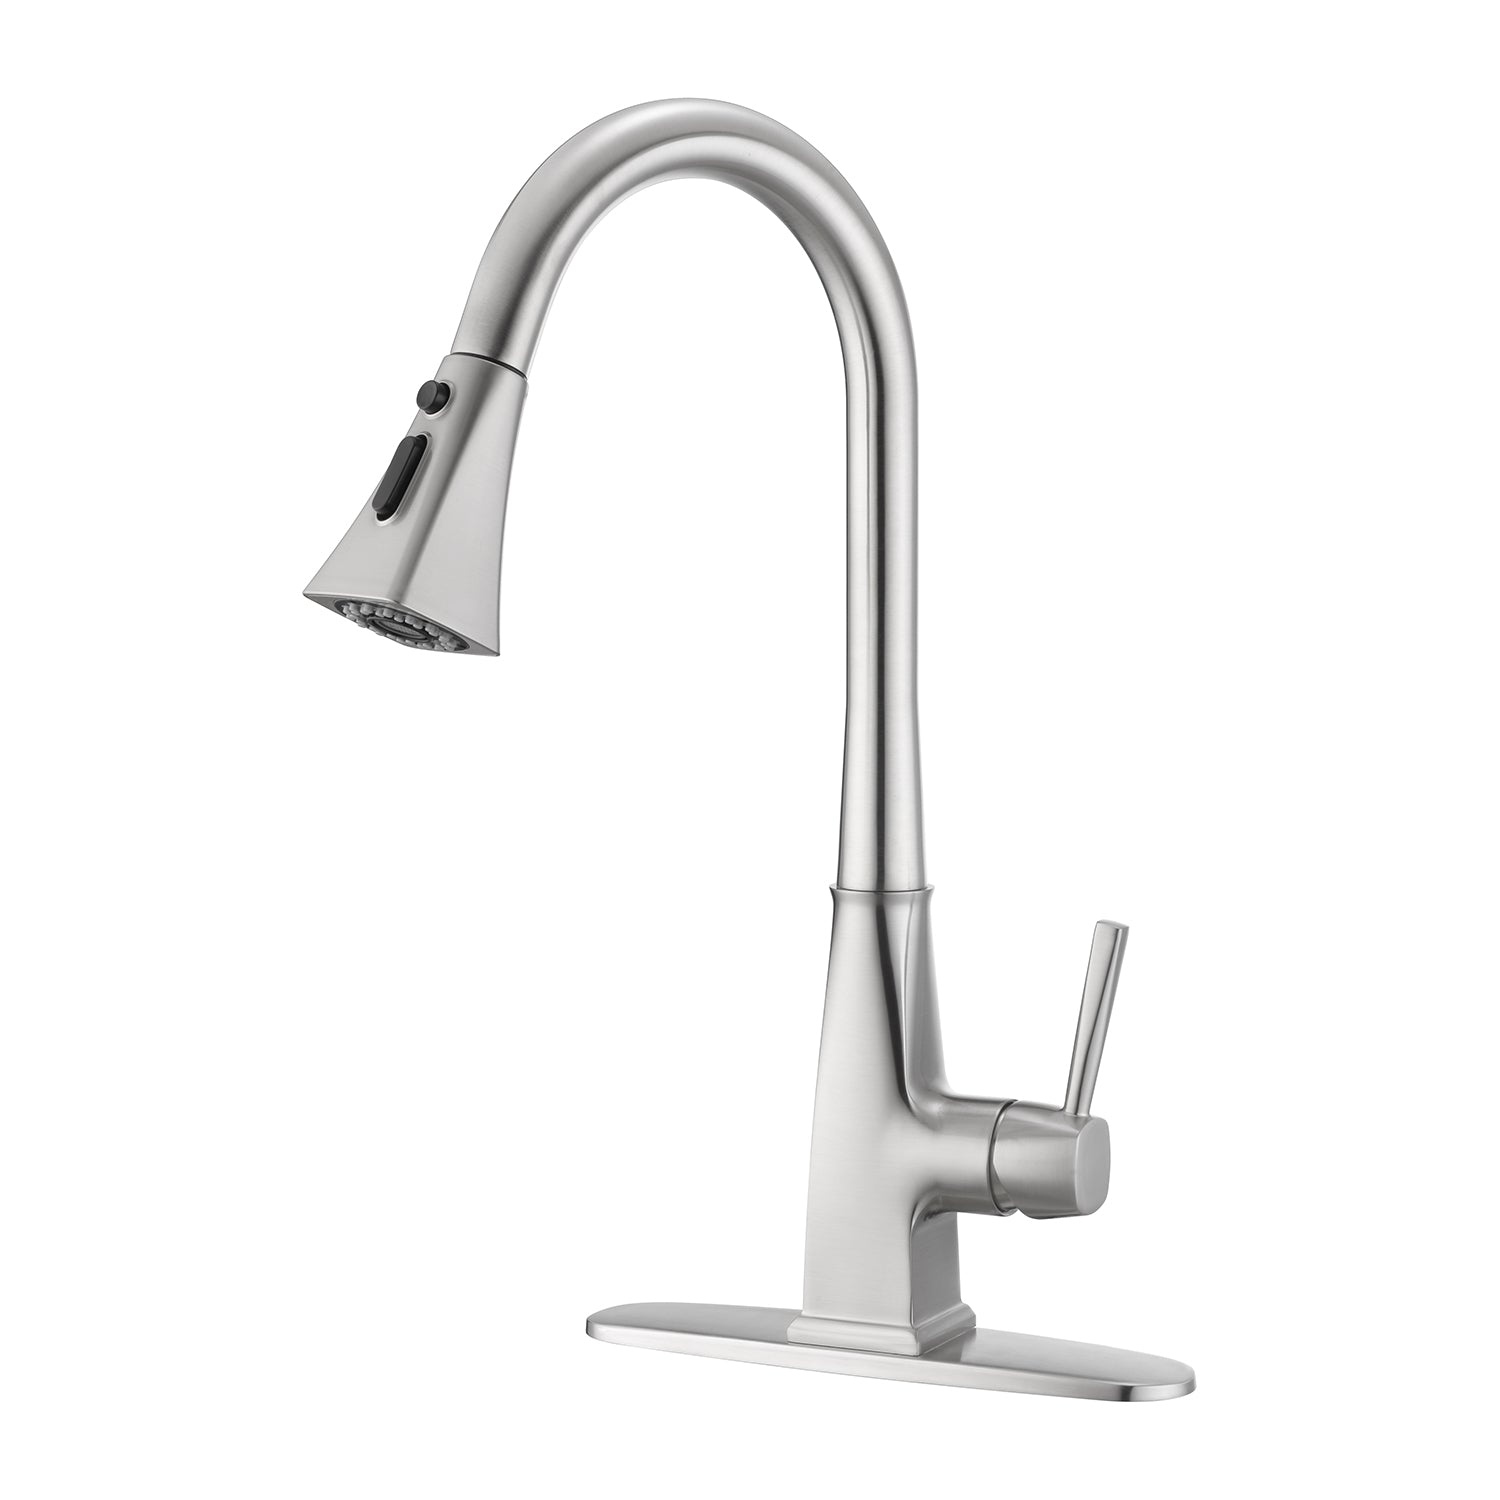 [Wholesale Only] CF-15014 pull down kitchen faucet-Arrisea